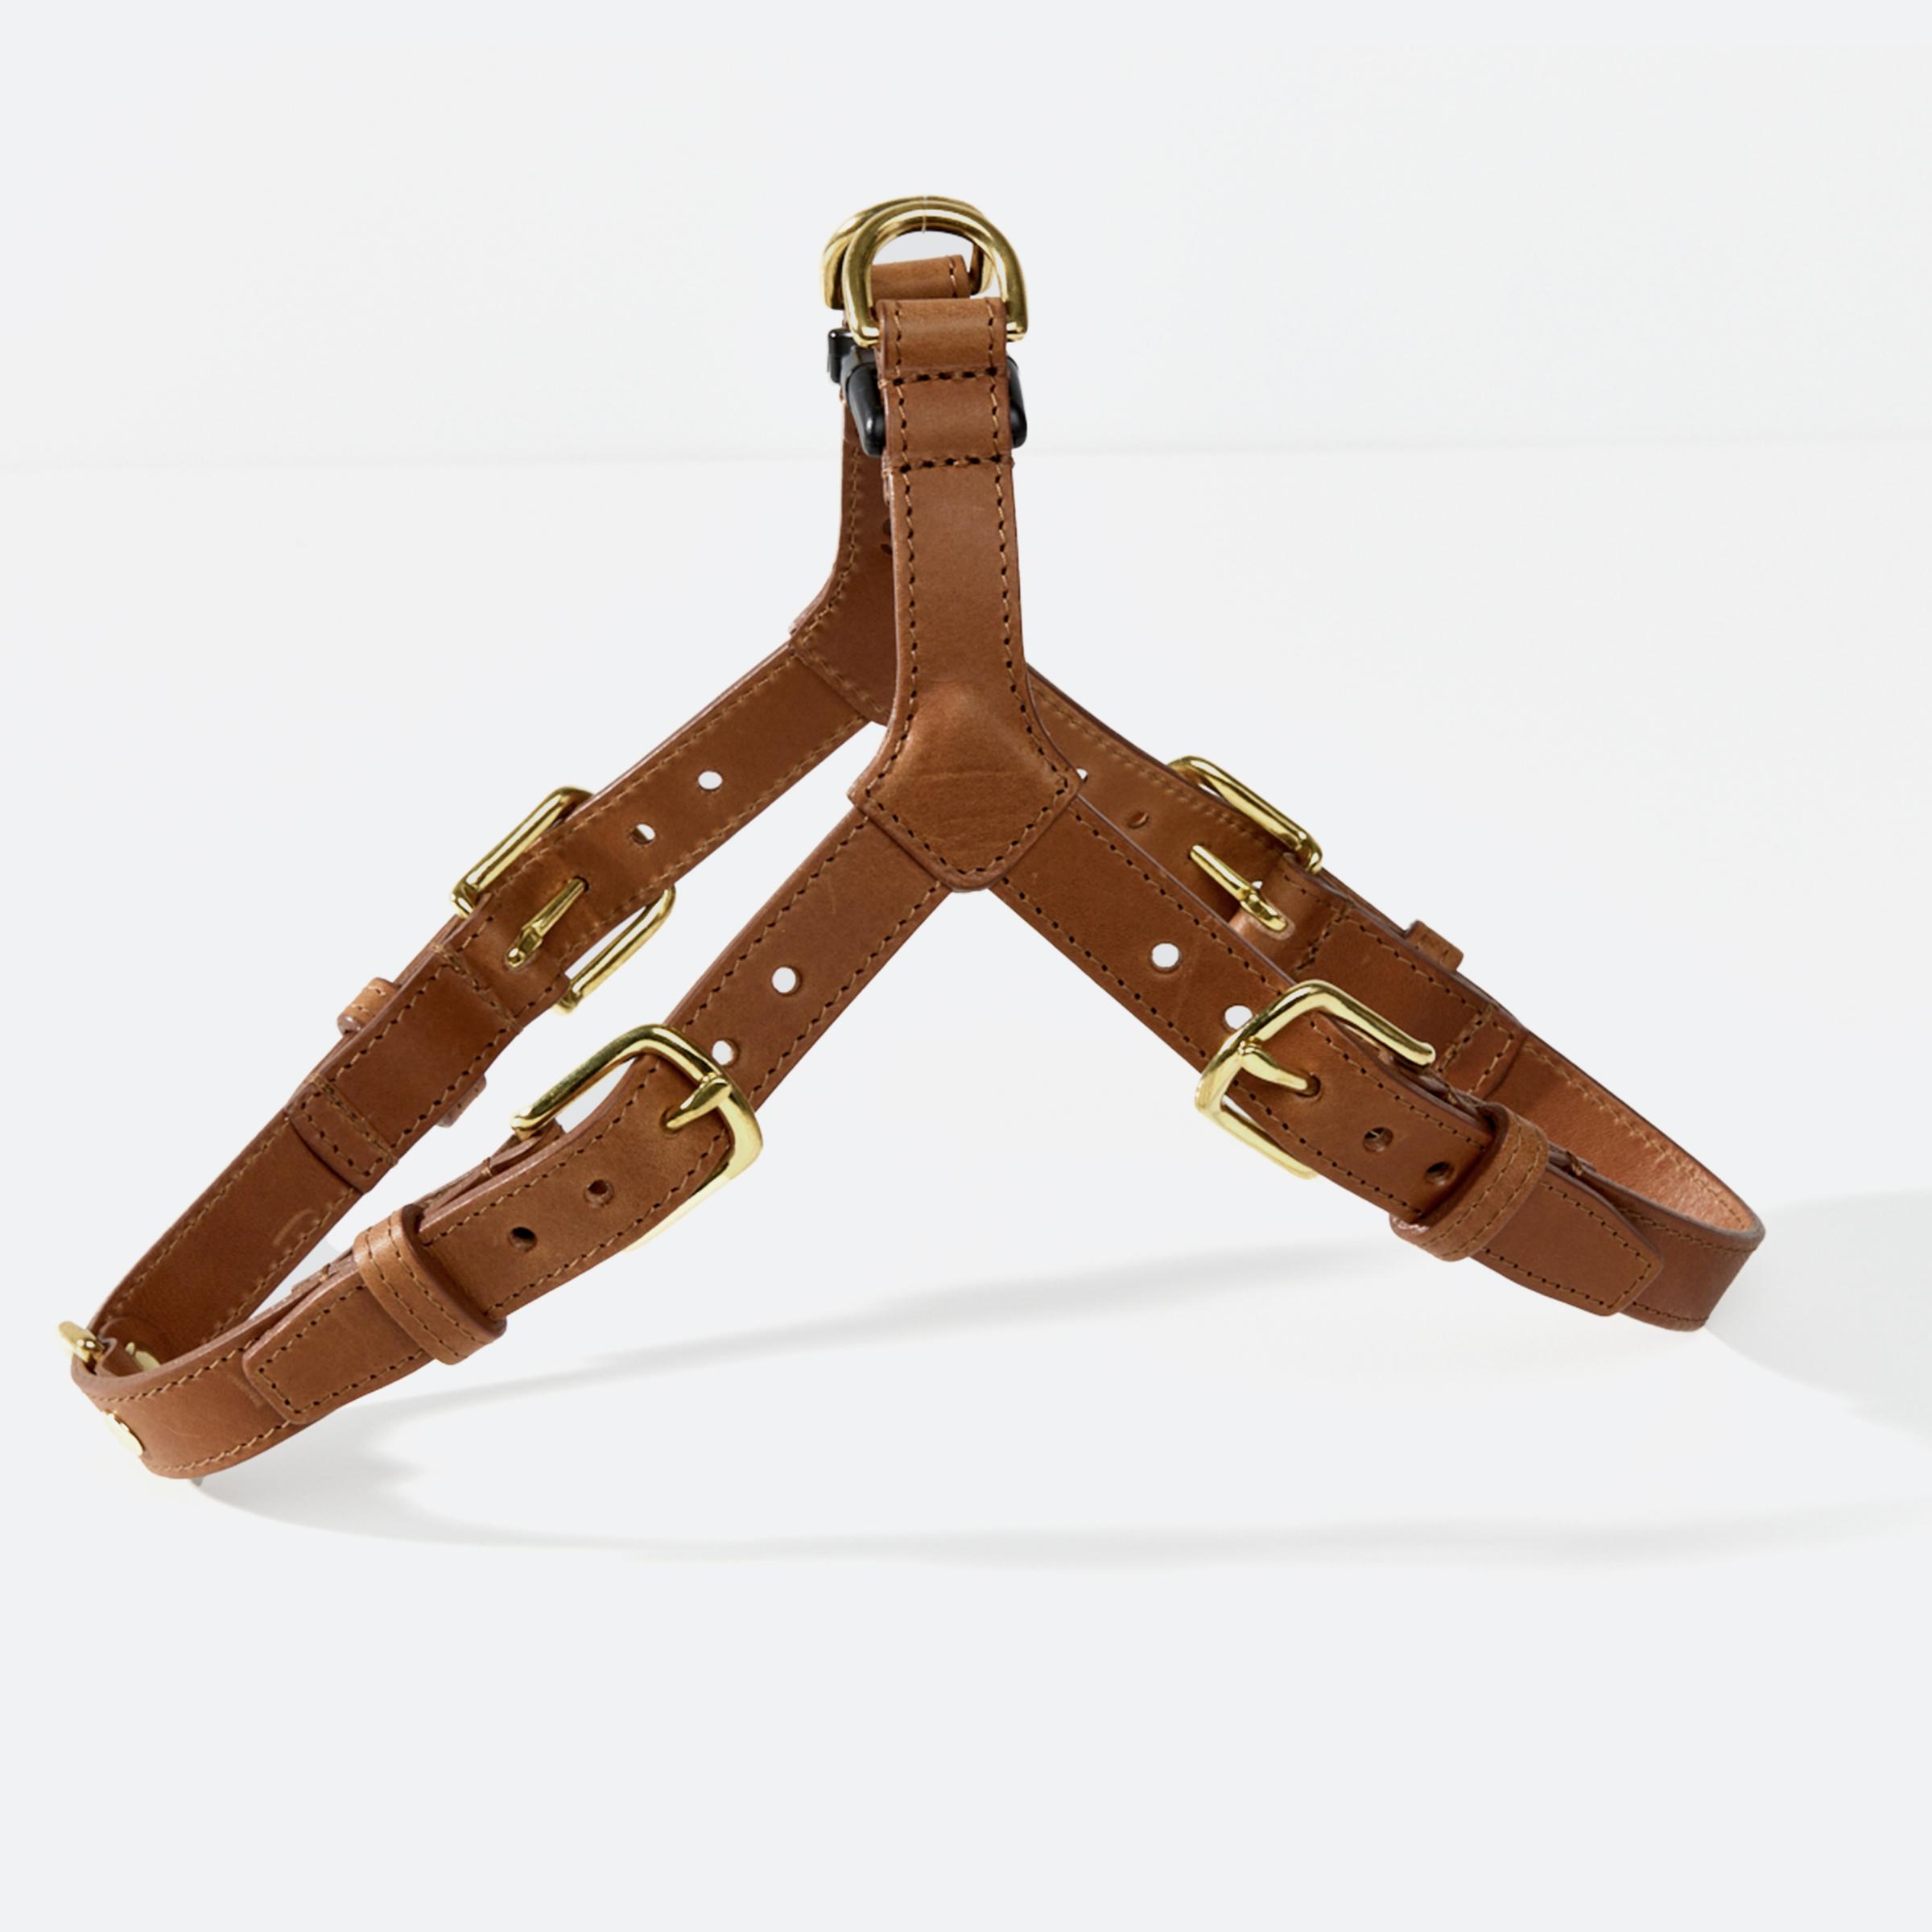 One-click Leather Dog Harness in Tan